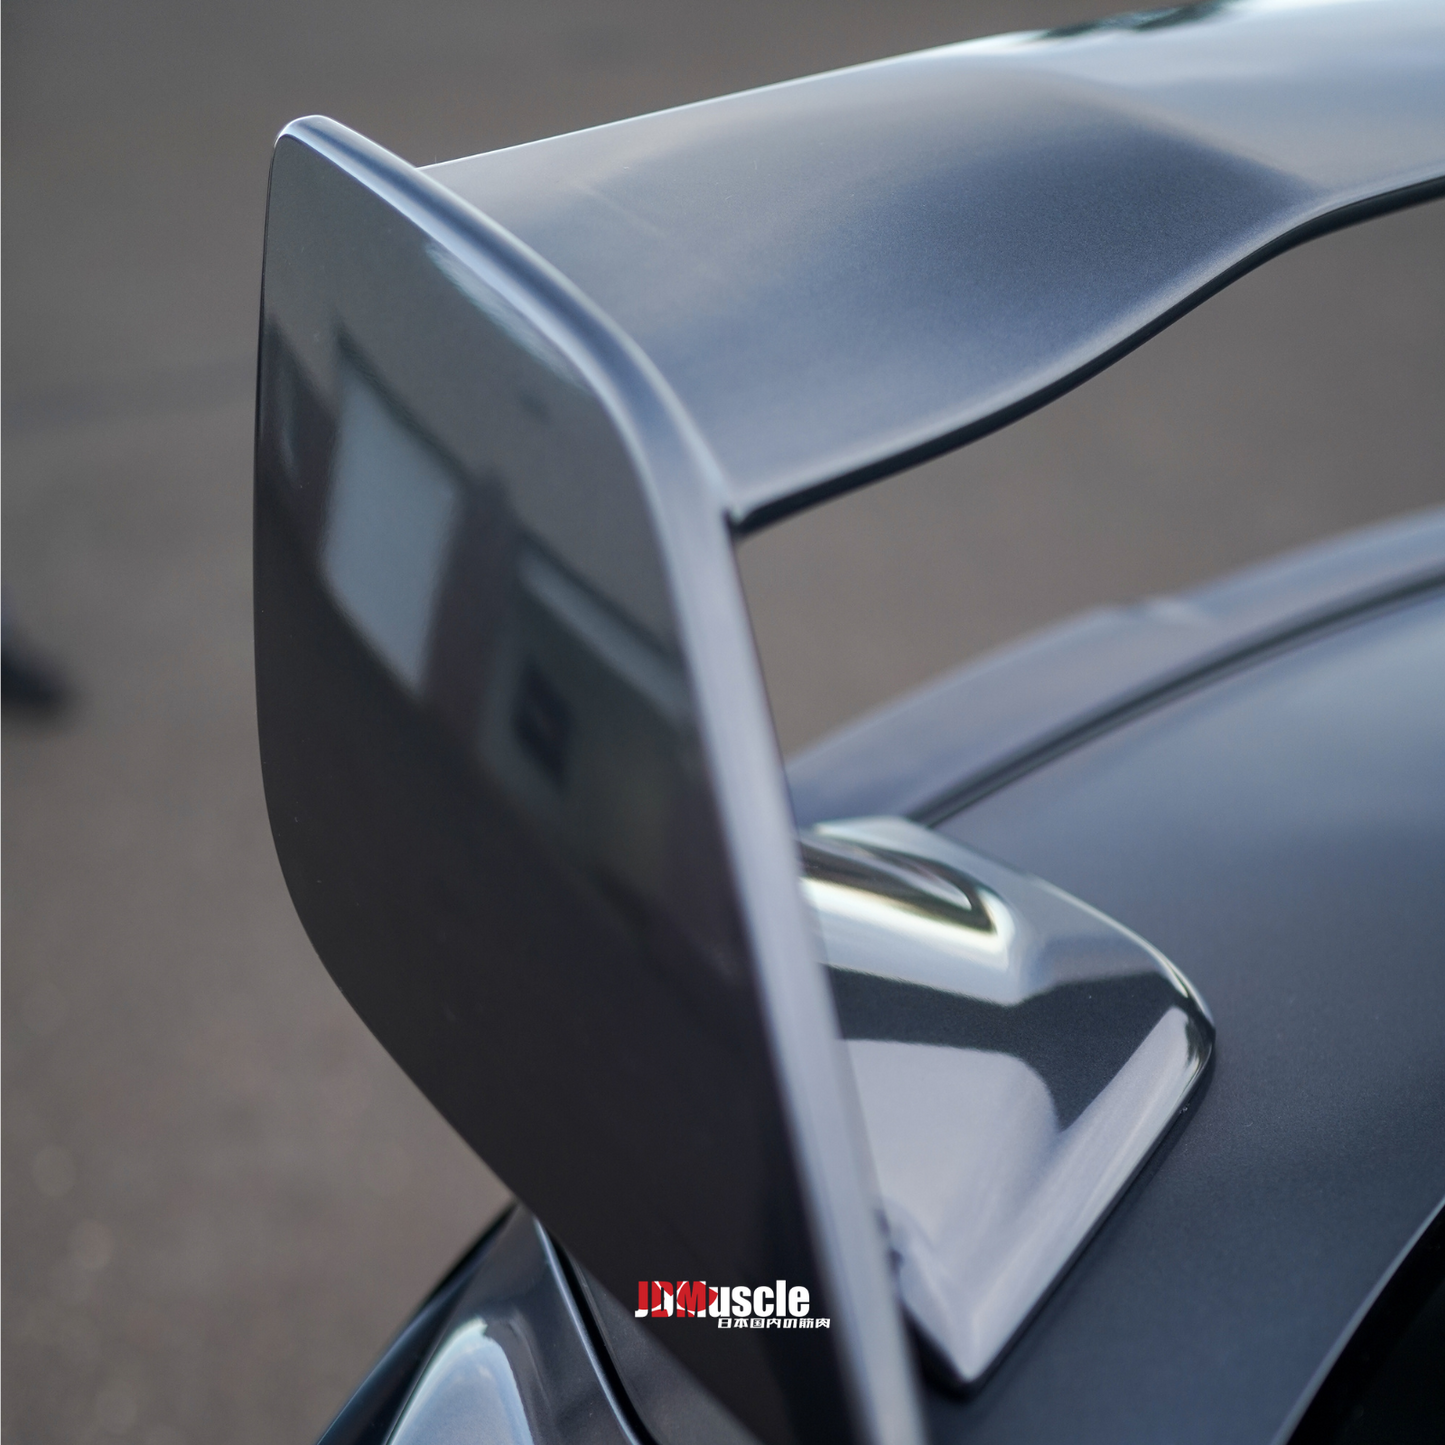 JDMuscle 2022-24 WRX Spoiler - VA STI Style Paint Matched / Gloss Black / ABS - Clearance, sales are final